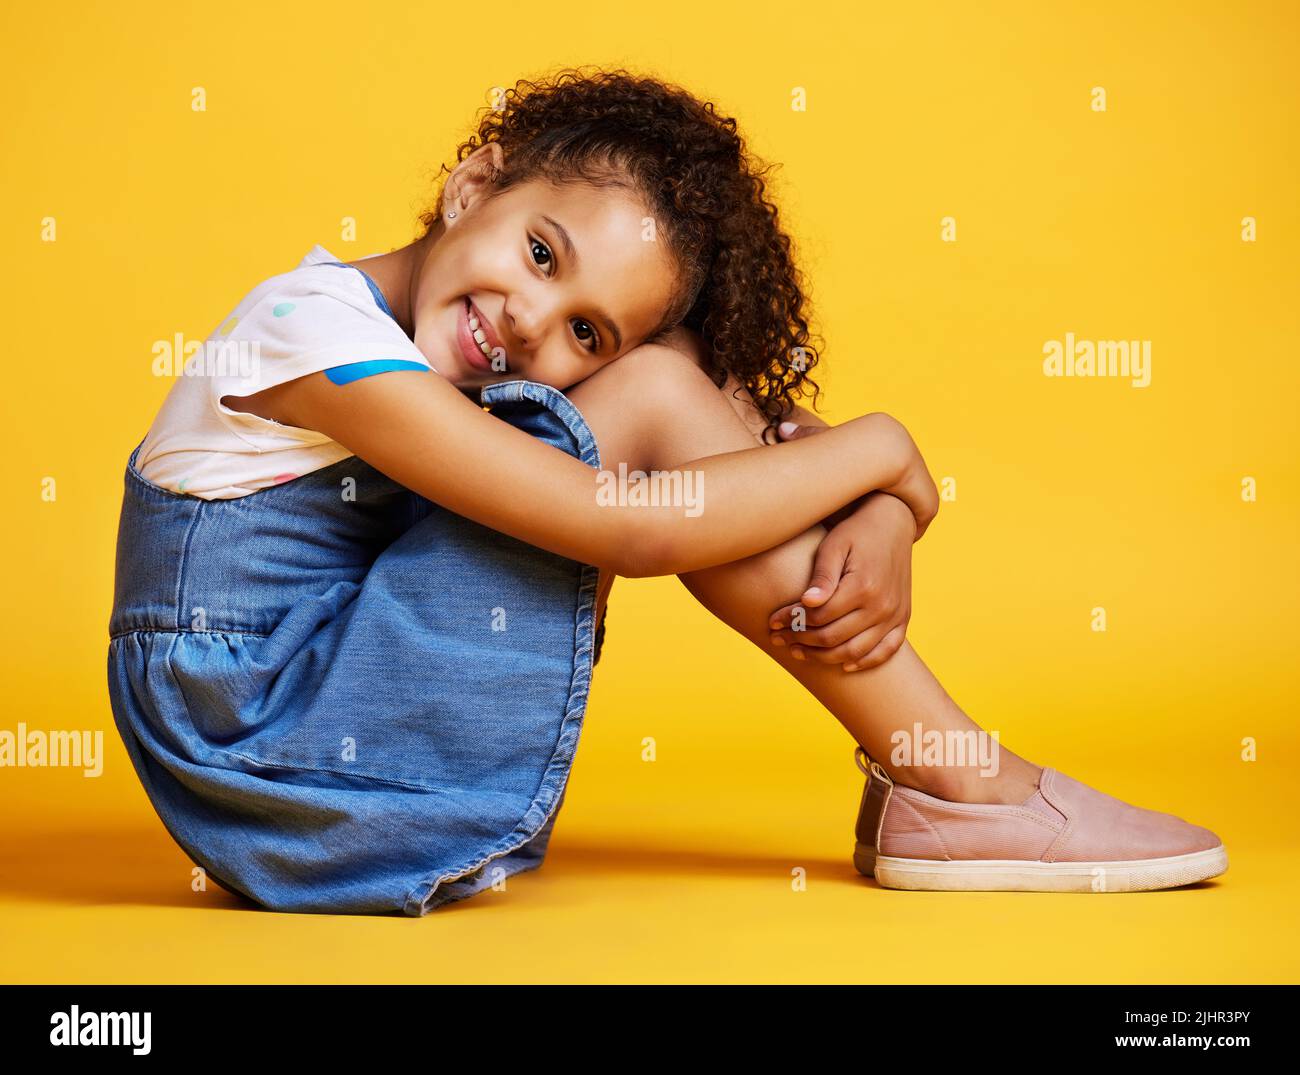 2. Mixed Race Girl Blue Hair Images, Stock Photos & Vectors - wide 4